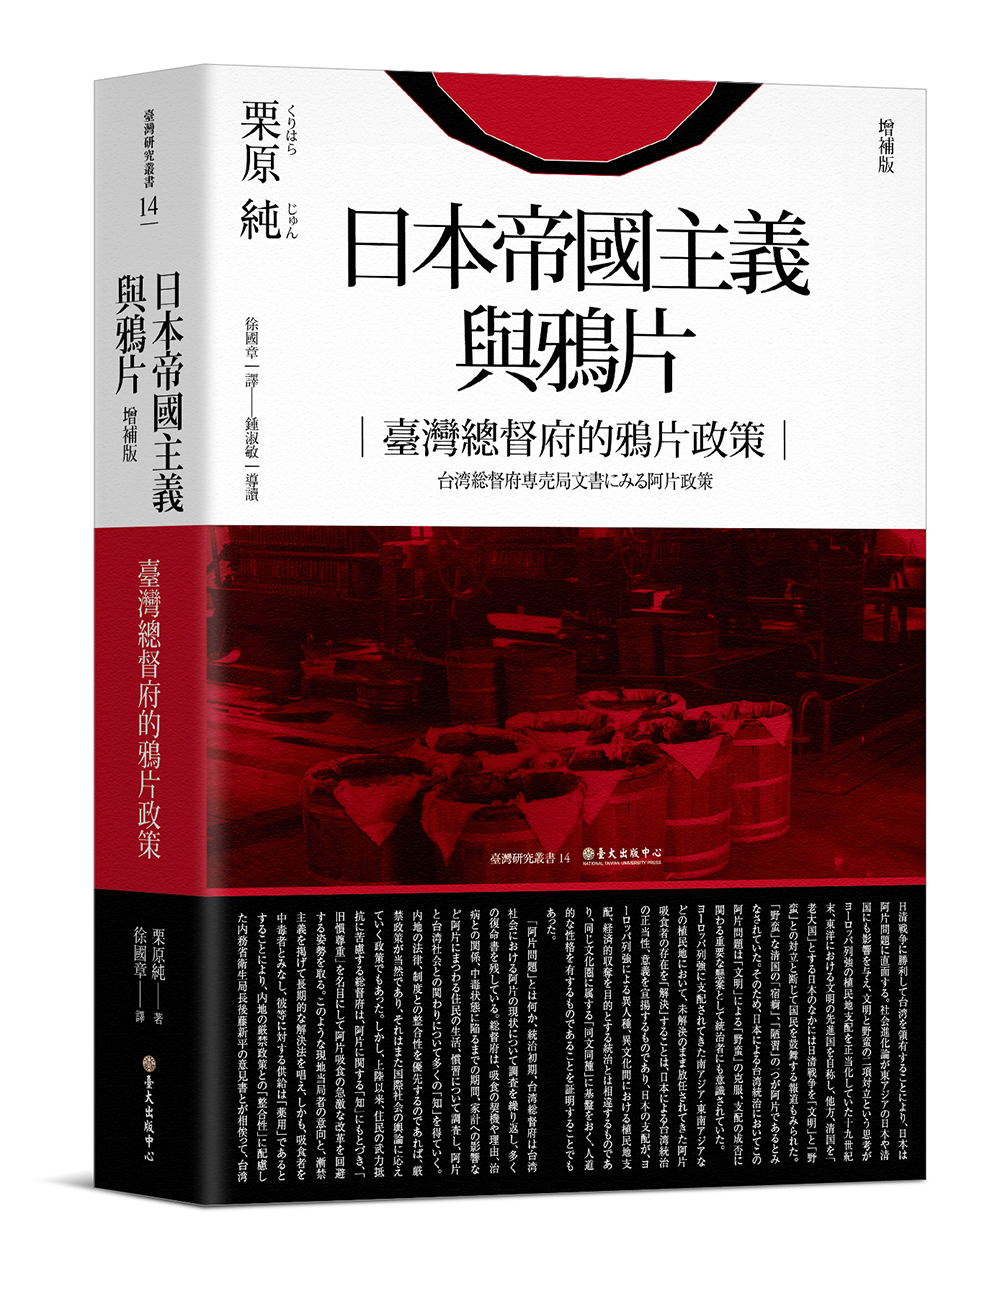 Japanese Imperialism and Opium: The Opium Policy of the Taiwan Governor-General's Office (Second Edition)